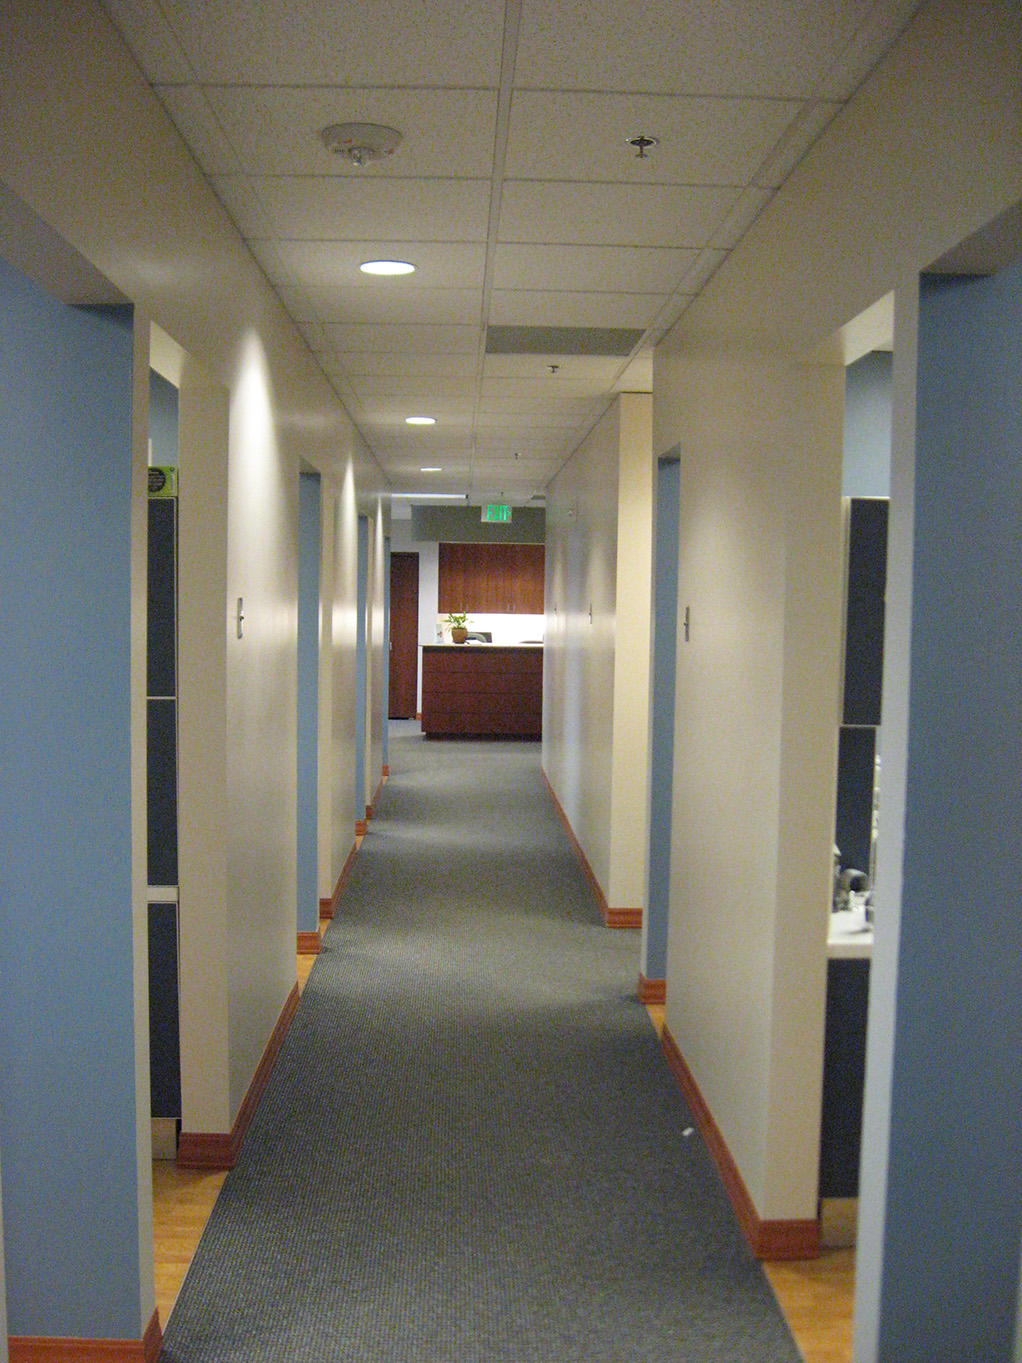 Commercial Office Space